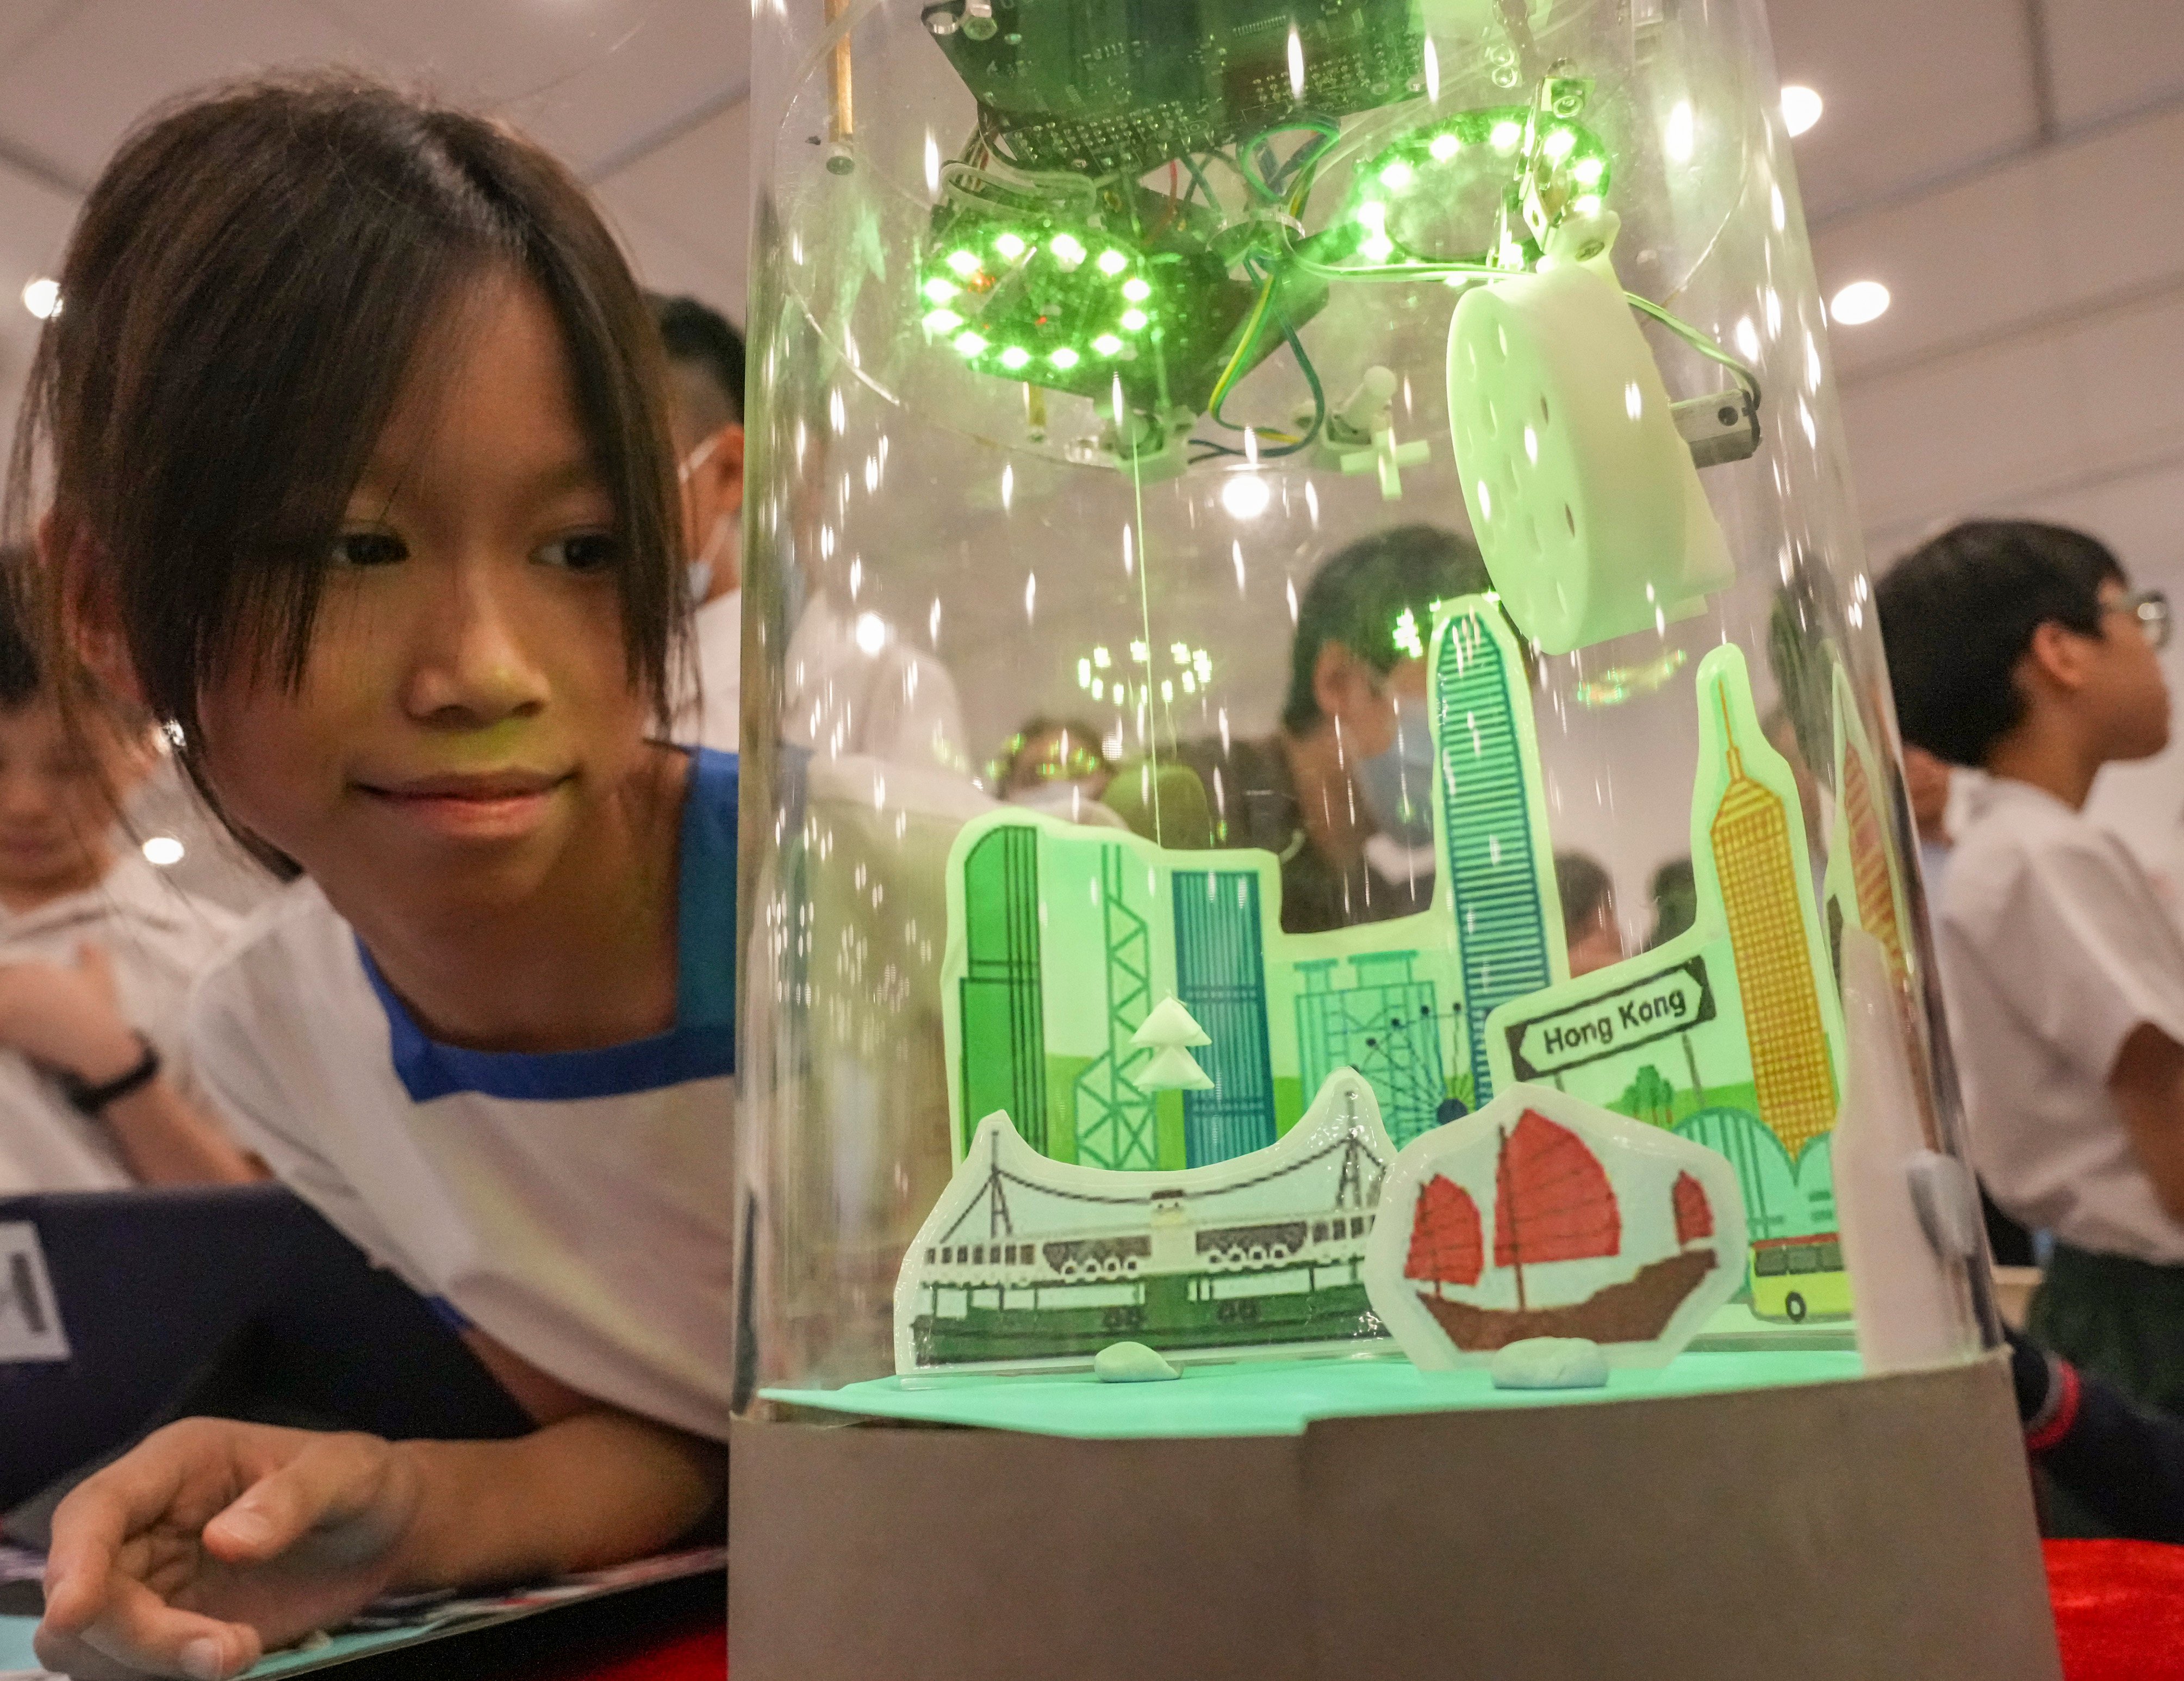 scmp.com - Jane Lee - Opinion | Cultivating creativity will inspire Hong Kong's future tech leaders